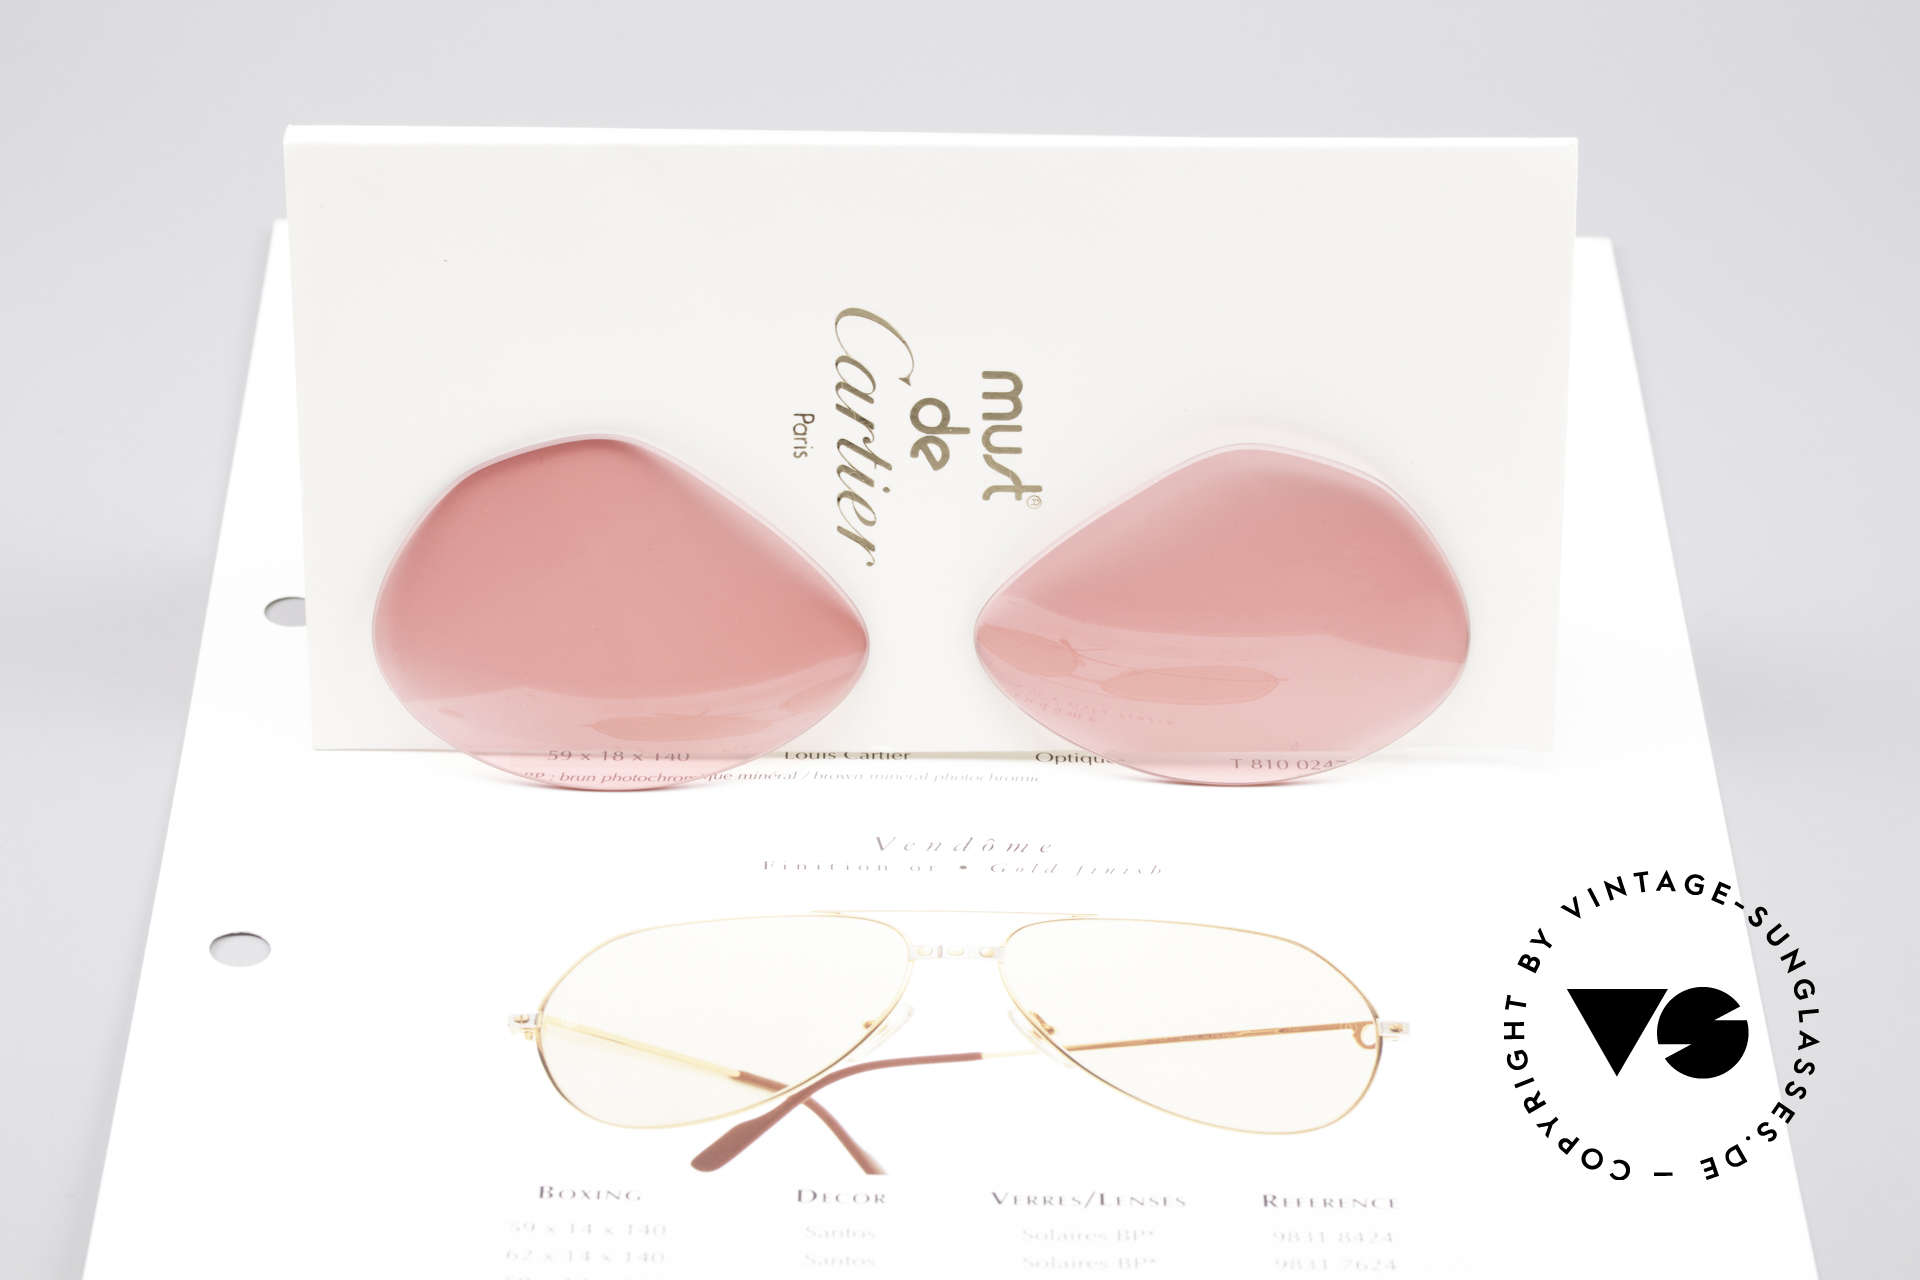 Cartier Vendome Lenses - M Pink Sun Lenses, pink tinted (so, you can see the world thru pink glasses), Made for Men and Women